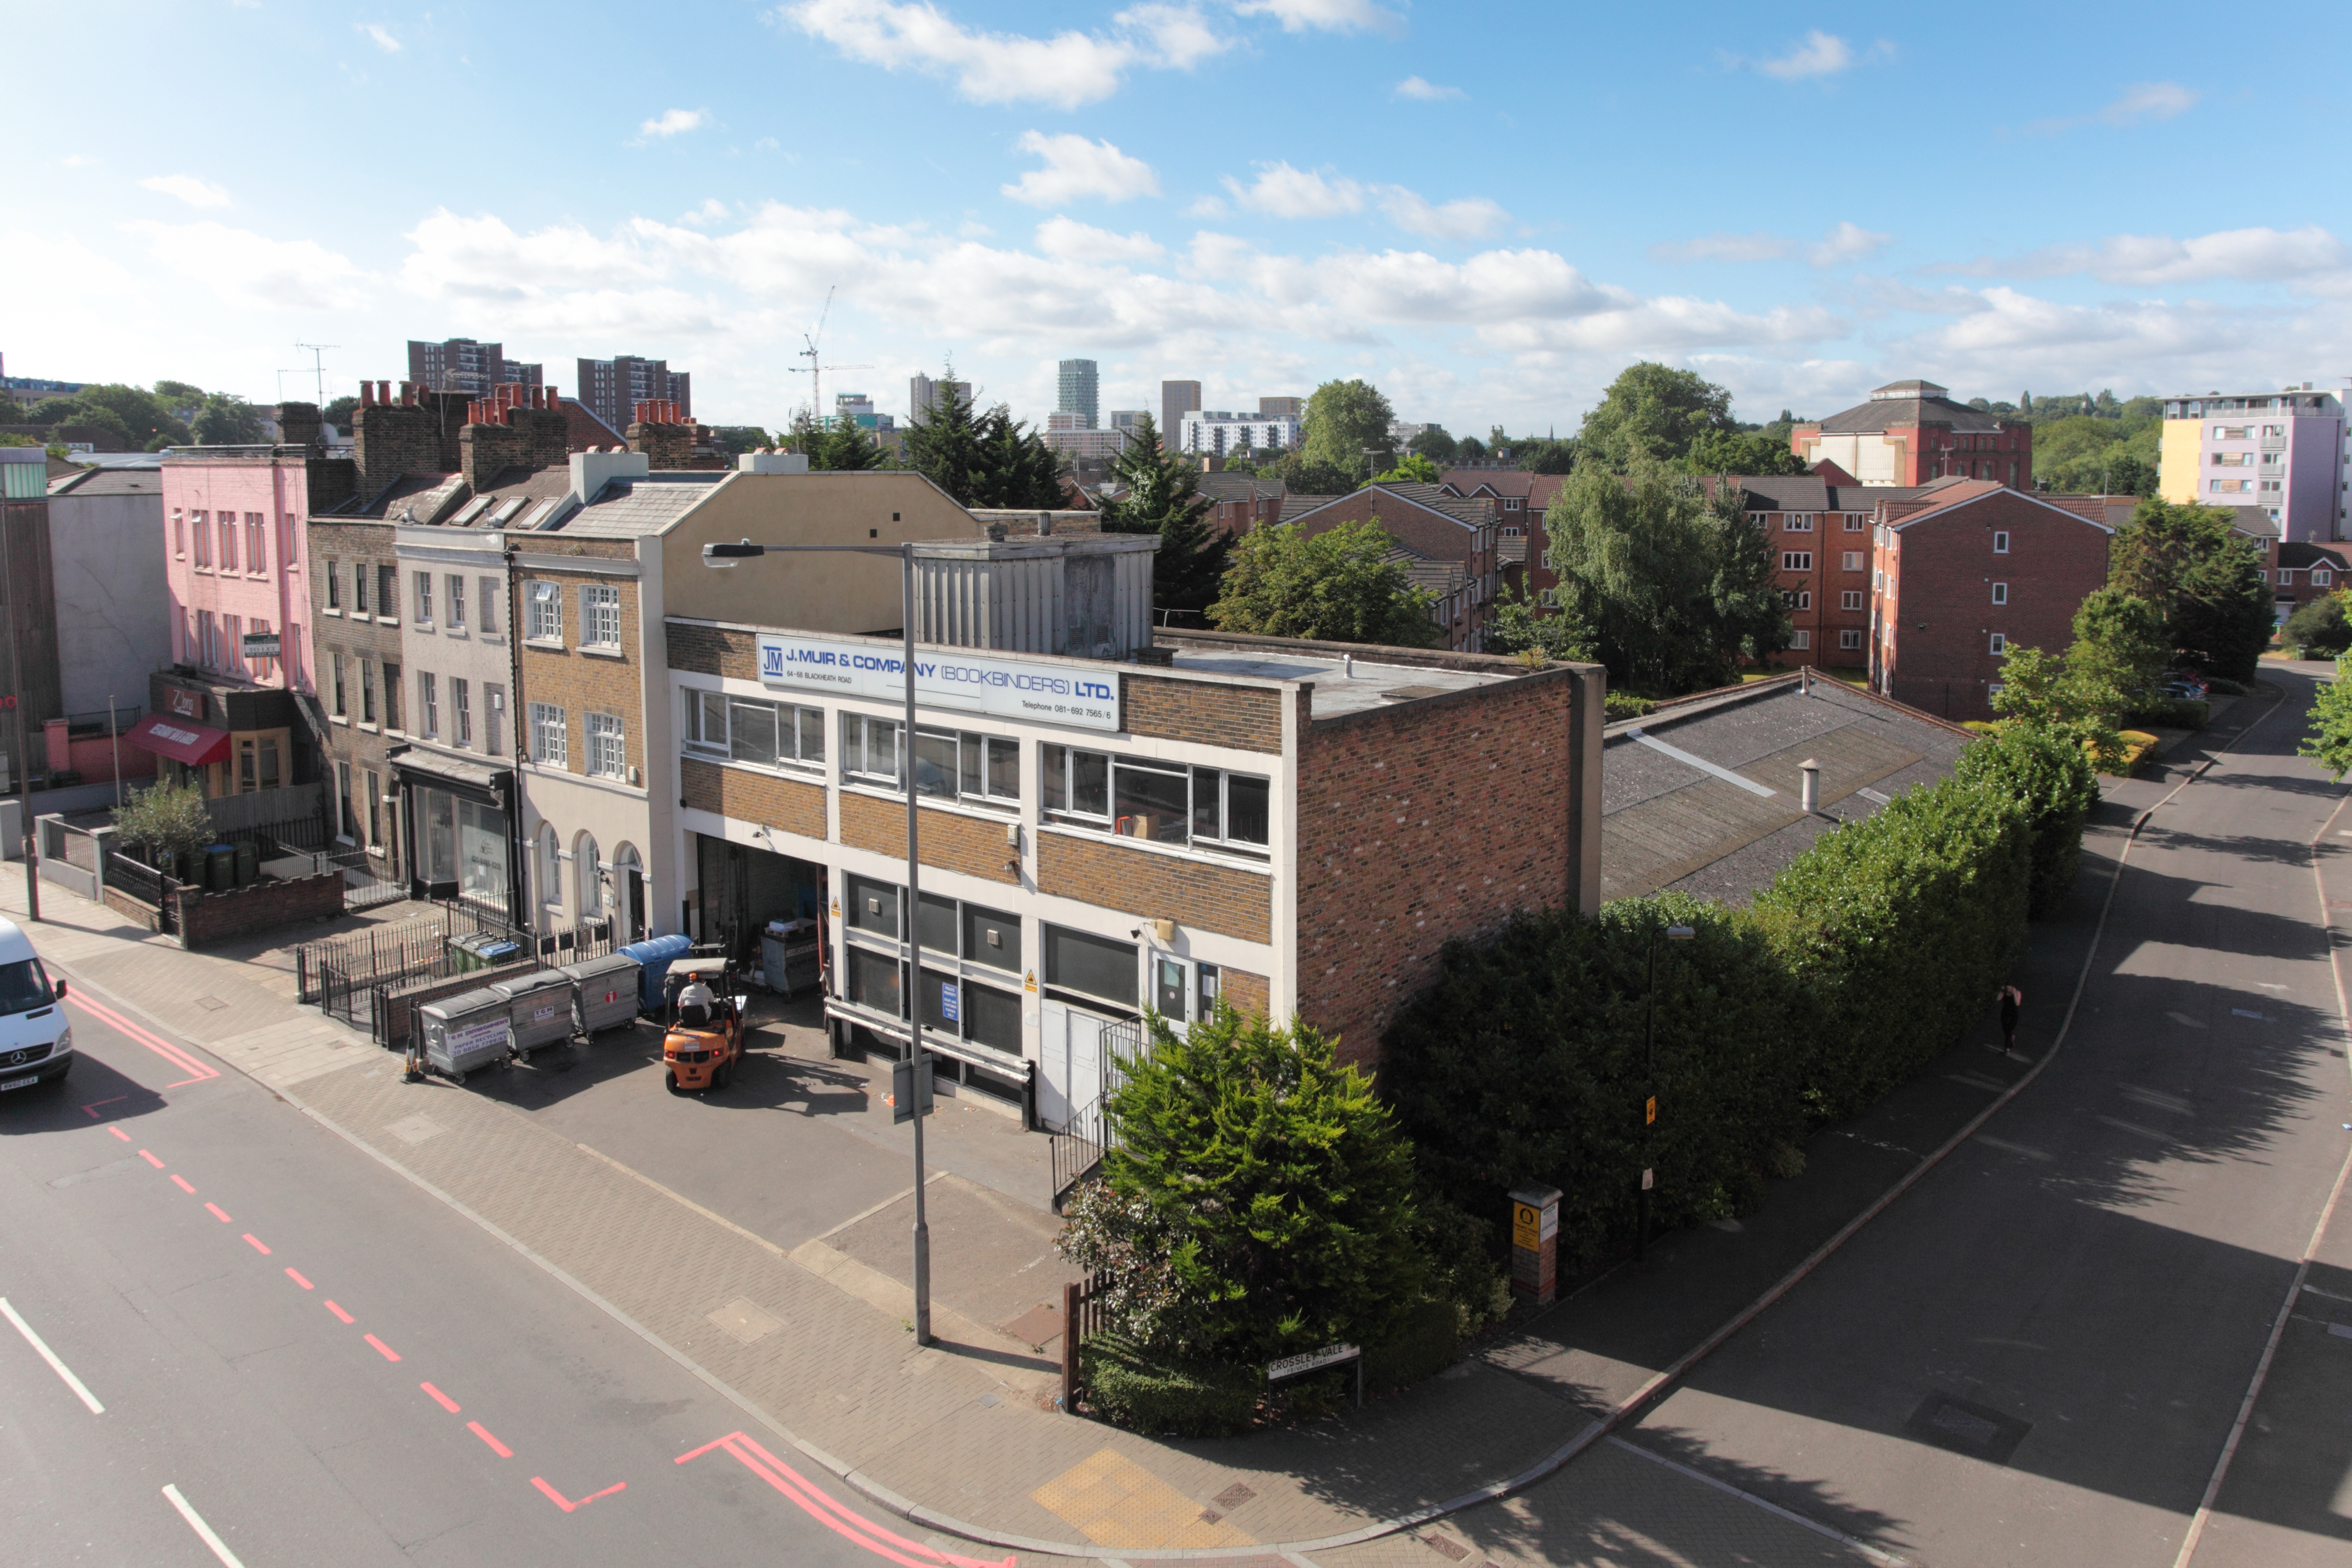 Tenanted 10,000 sq ft Warehouse. Potential for a mixed-use scheme. Acquired swiftly and unconditionally. Blackheath Road, SE10, London Borough of Greenwich.